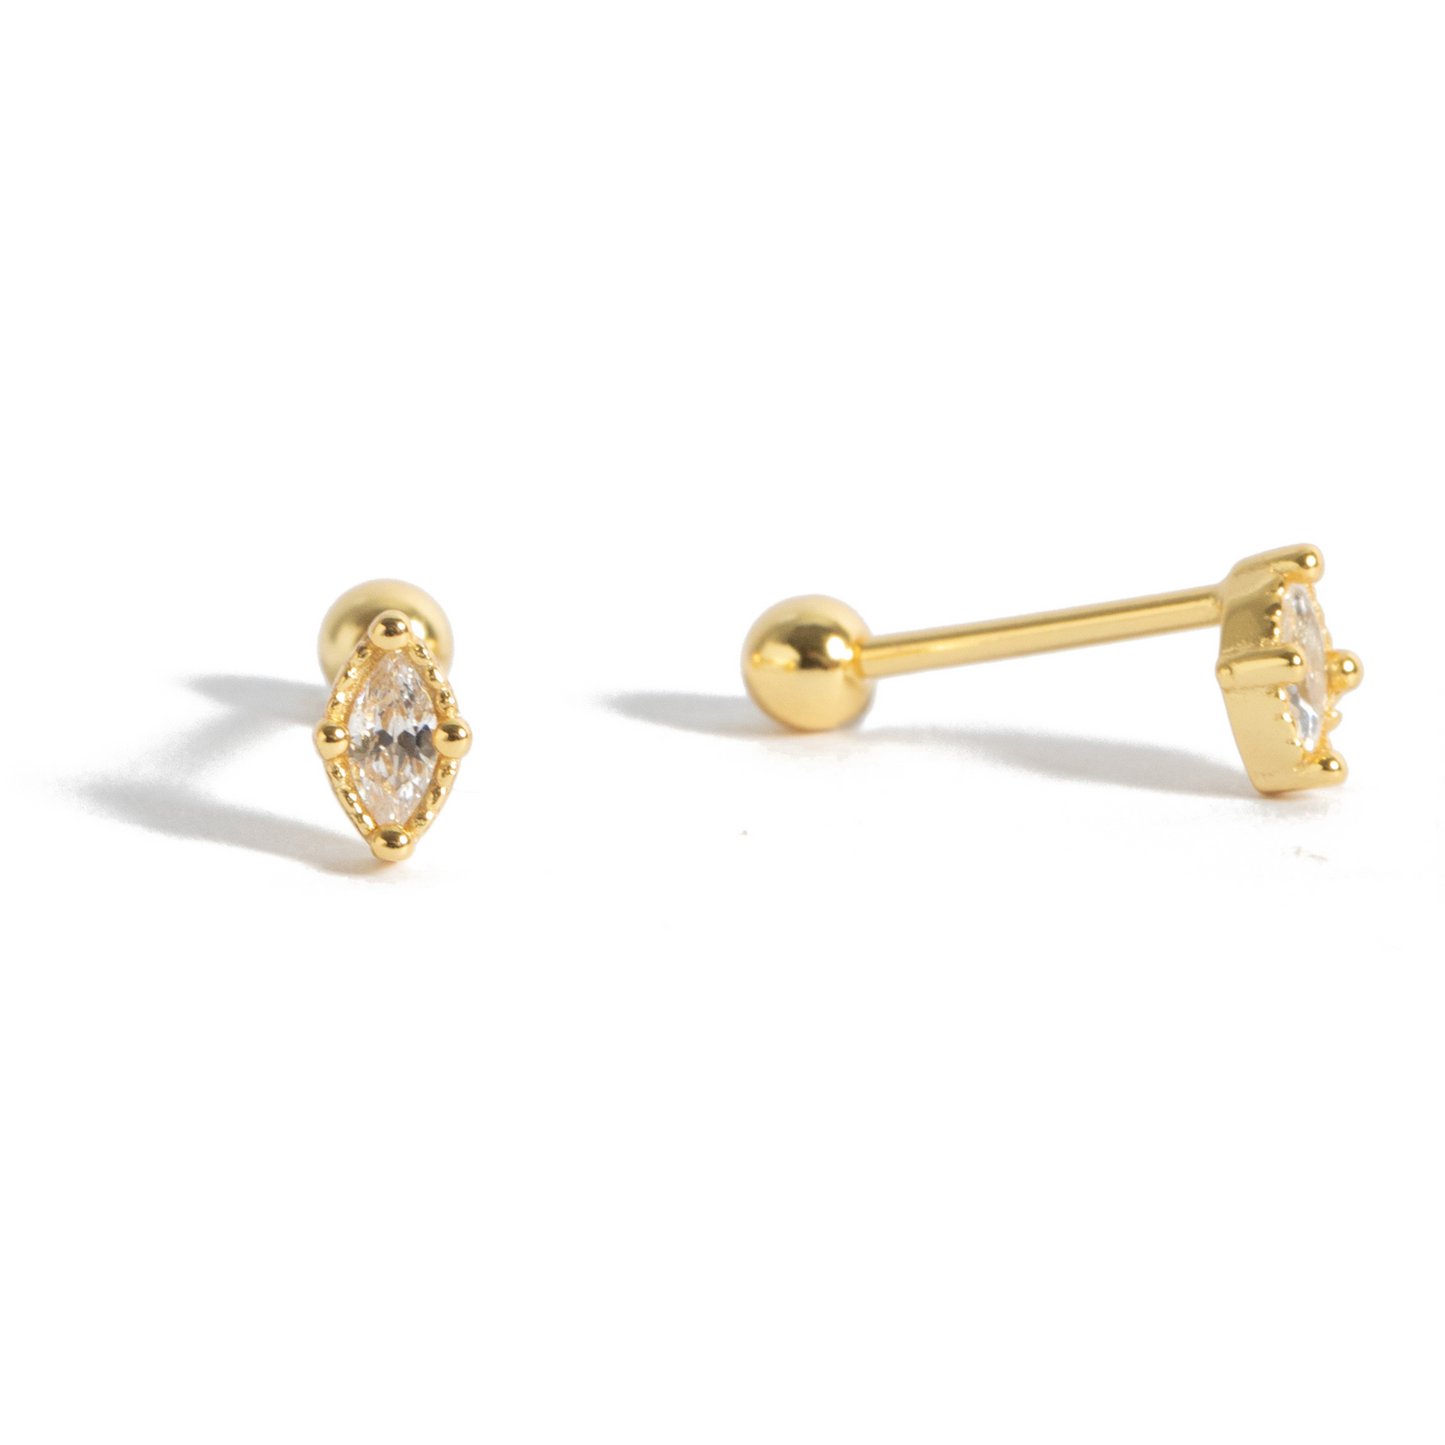 TINY EARRINGS TAGLIO MARQUISE